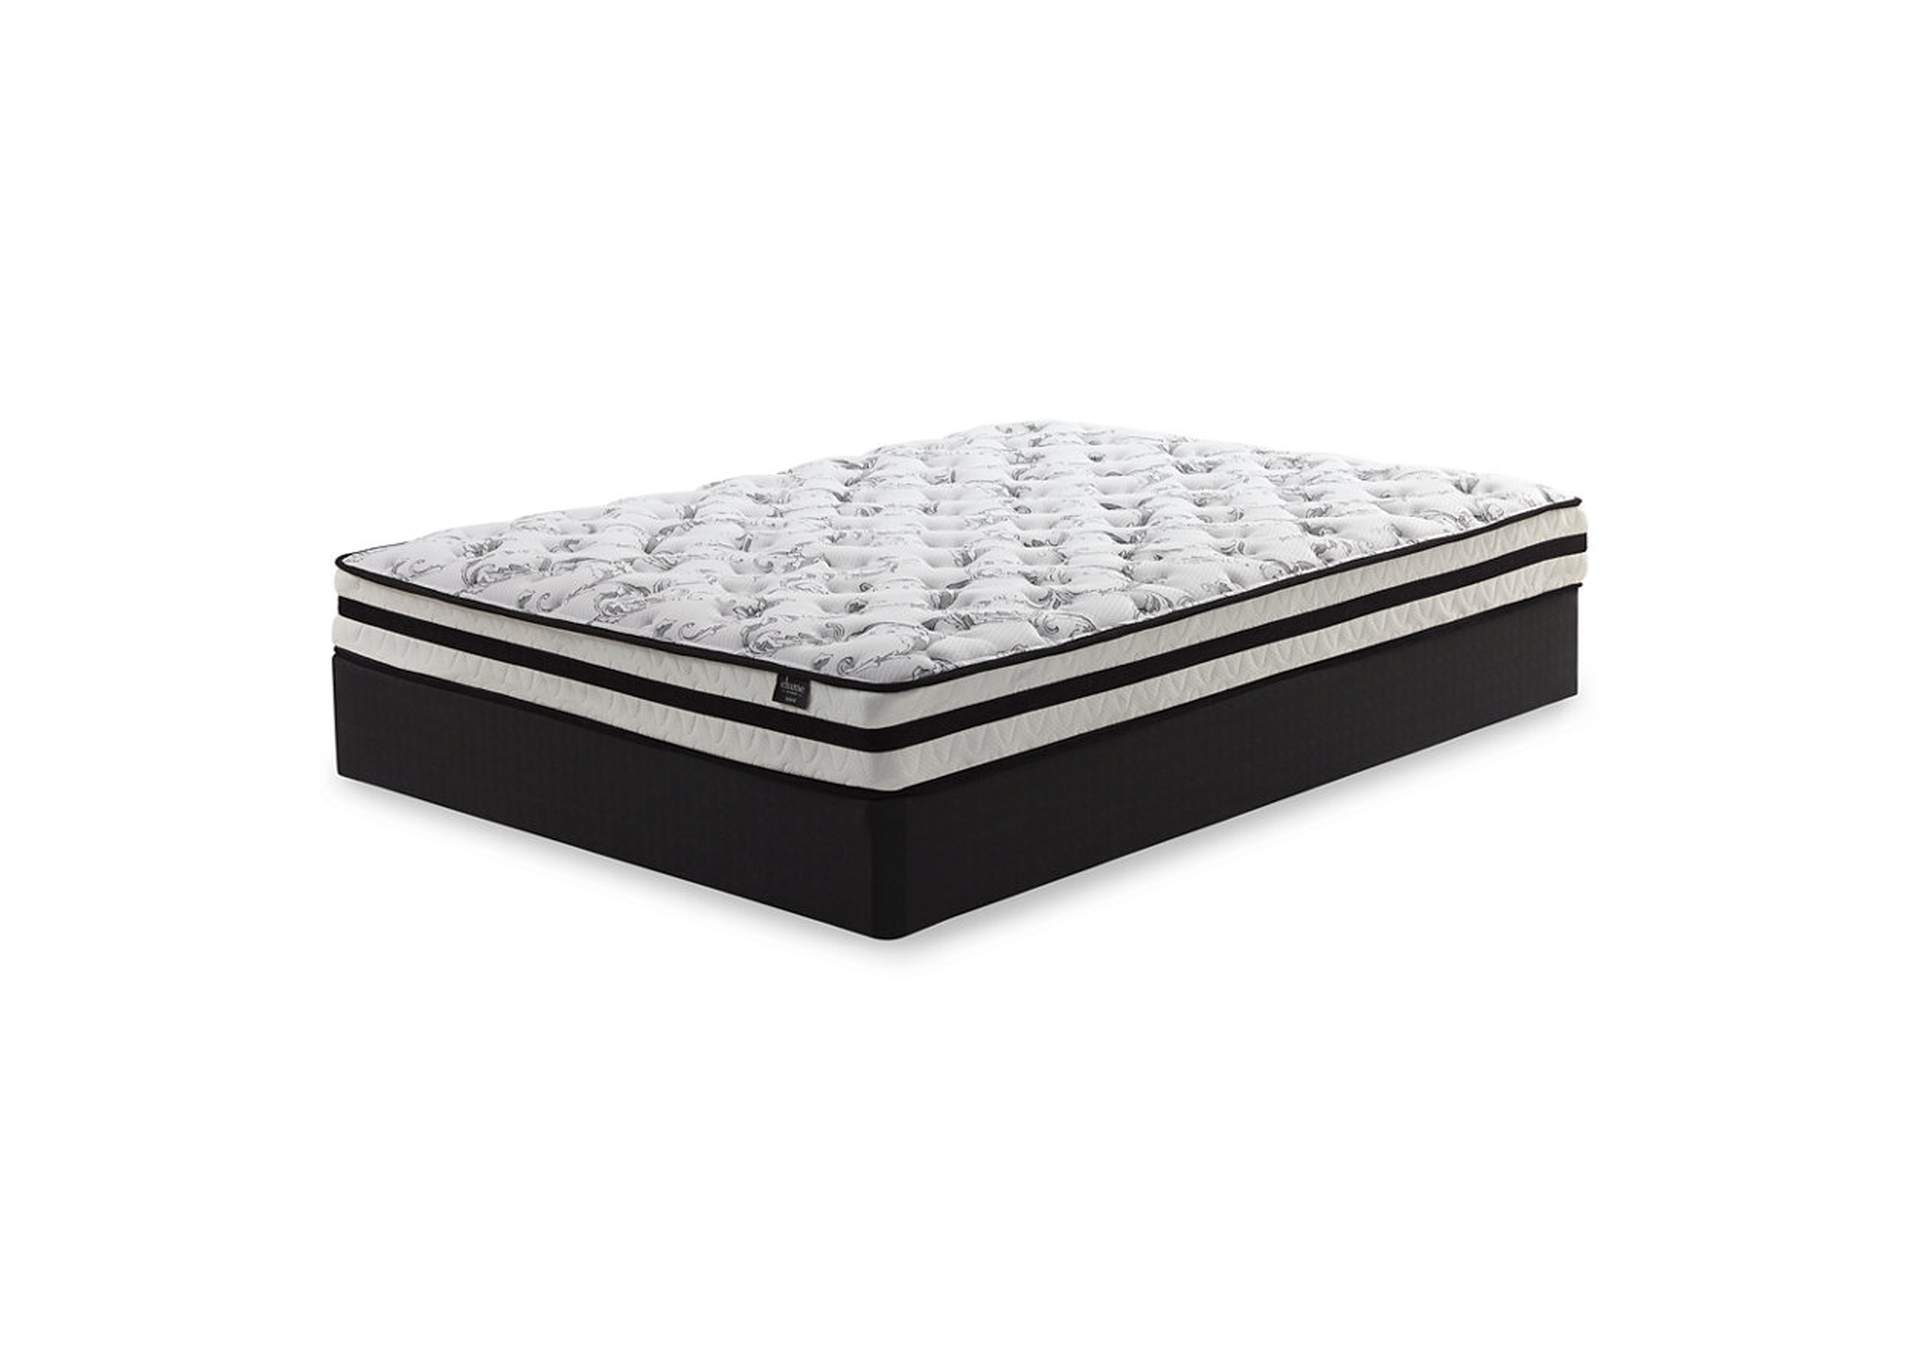 8 Inch Chime Innerspring Queen Mattress in a Box,Direct To Consumer Express